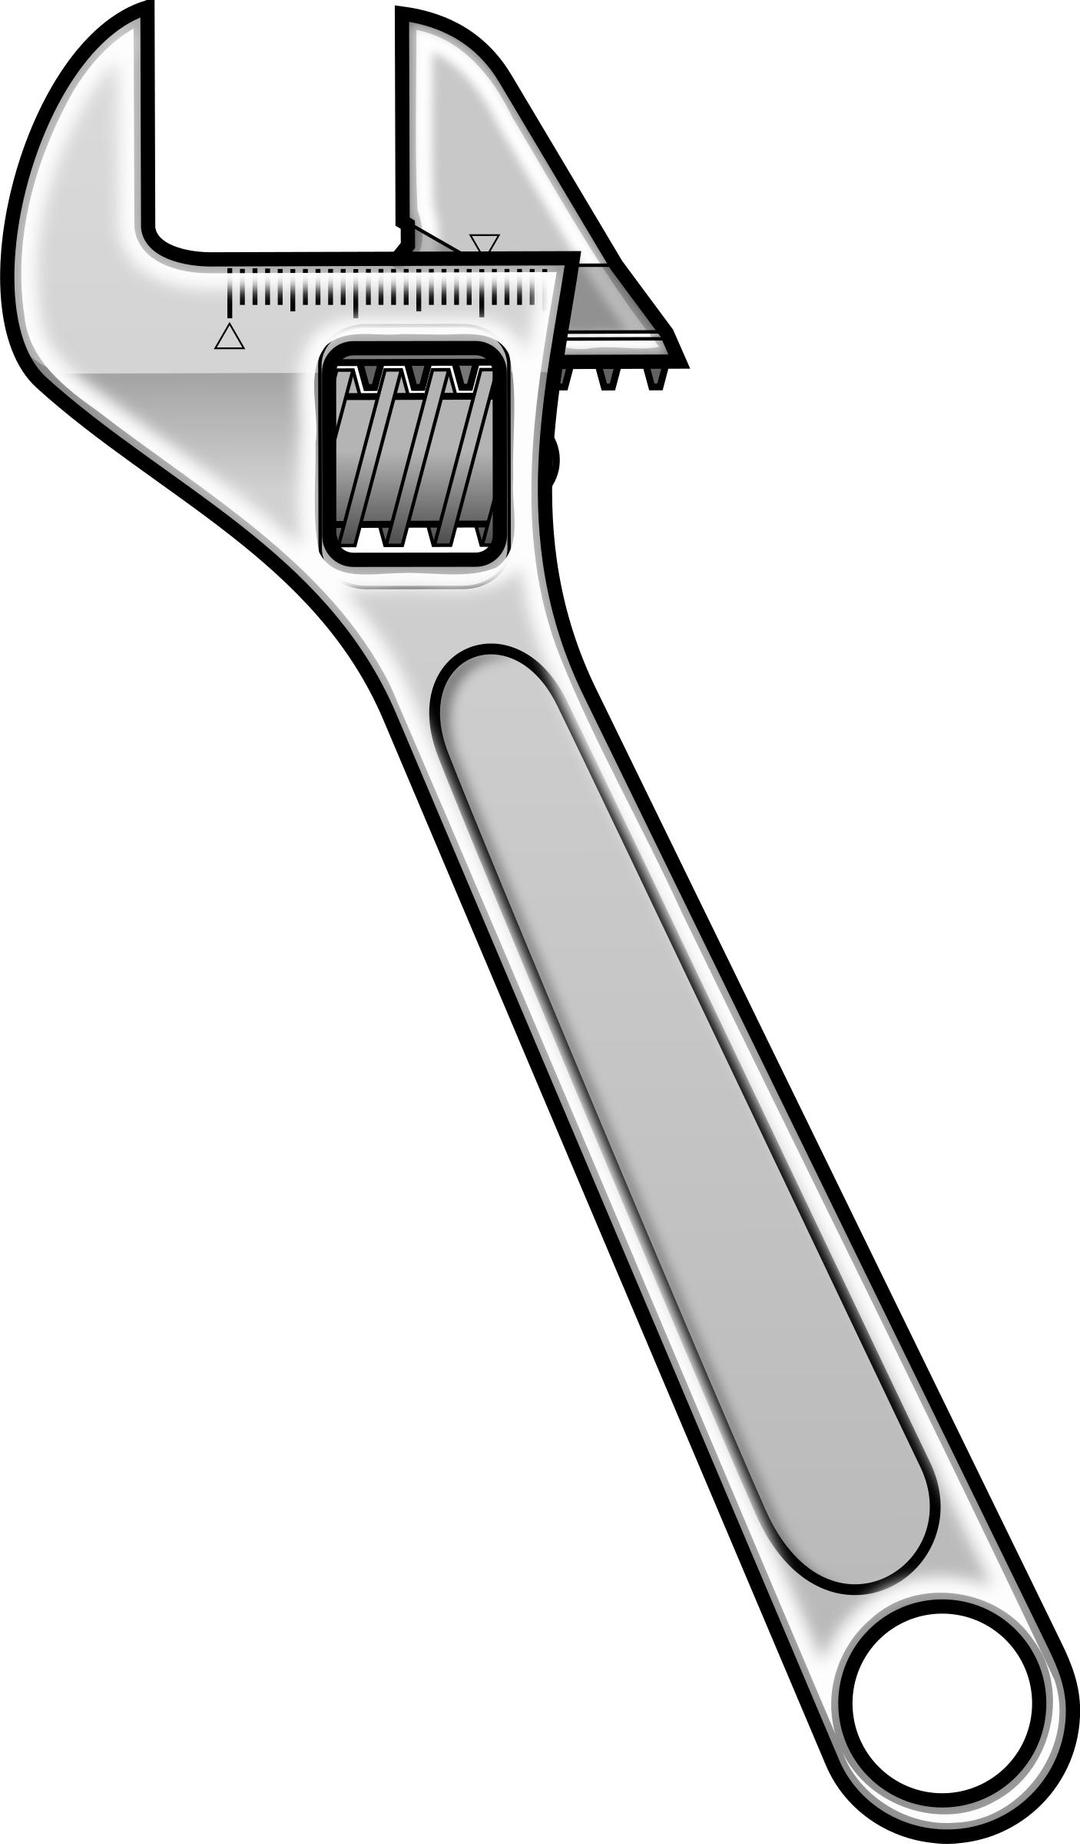 Adjustable wrench - icon style png transparent